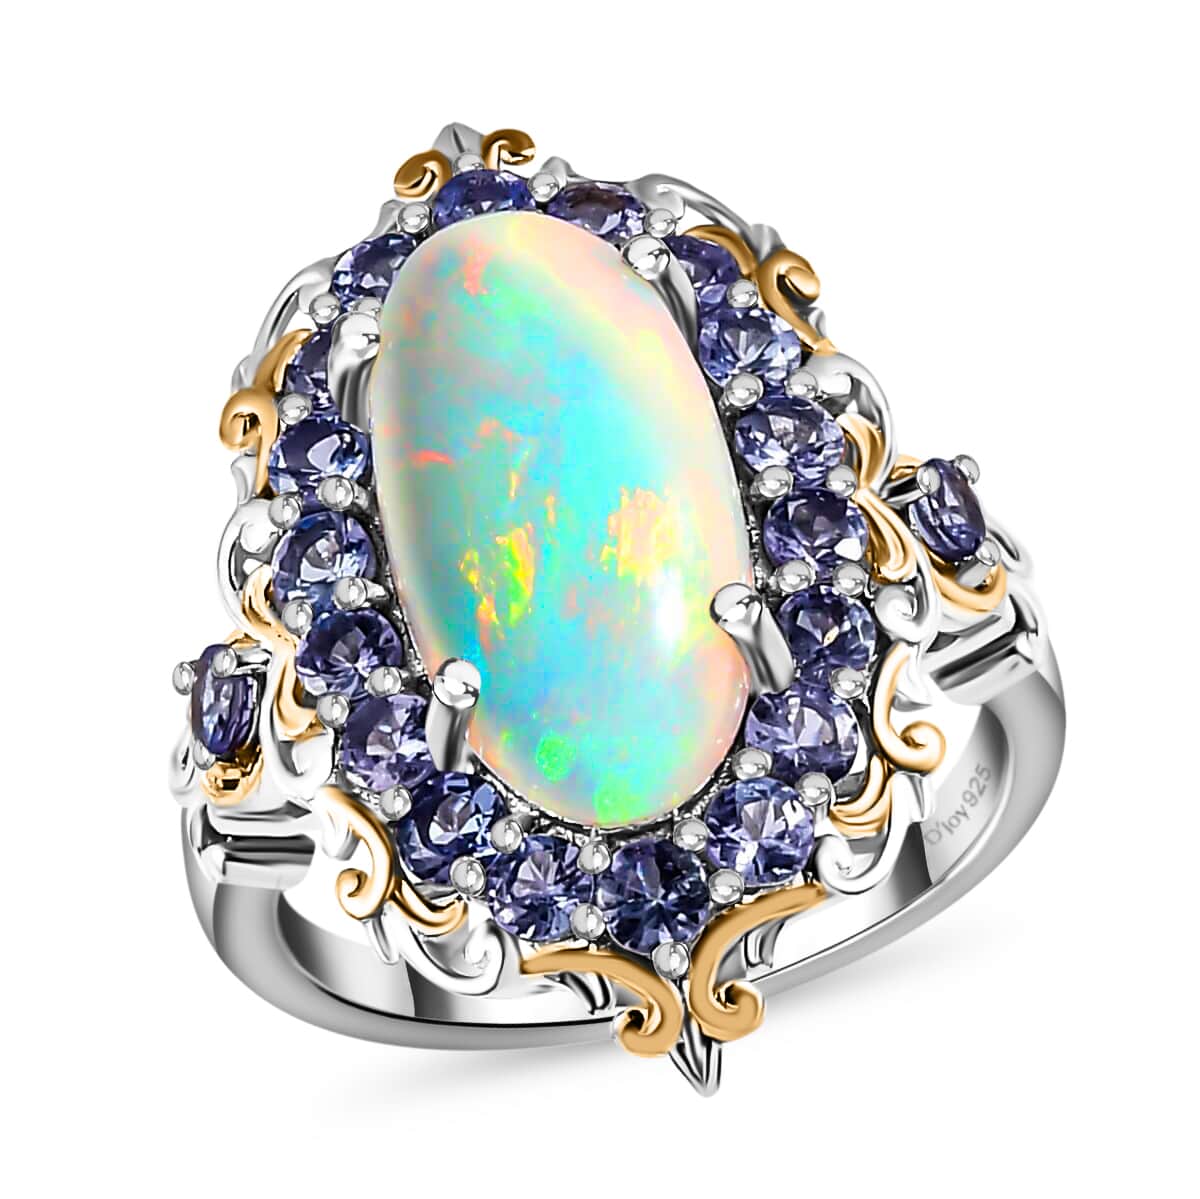 Premium Ethiopian Welo Opal Ring, Tanzanite Accent Ring, Floral Halo Ring, Vermeil YG and Platinum Over Sterling Silver Ring, Opal Jewelry, Gifts For Her 4.75 ctw (Size 10.0) image number 0